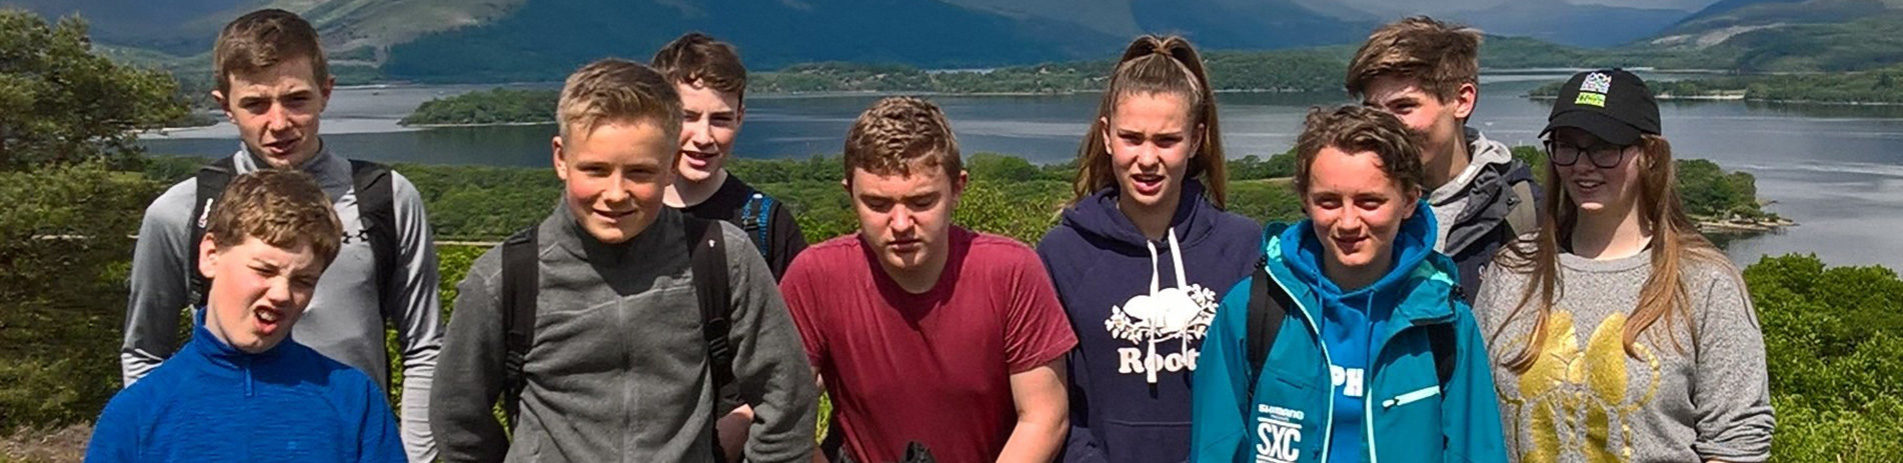 group-of-nine-young-people-on-a-summers-day-taken-in-front-of-loch-lomond